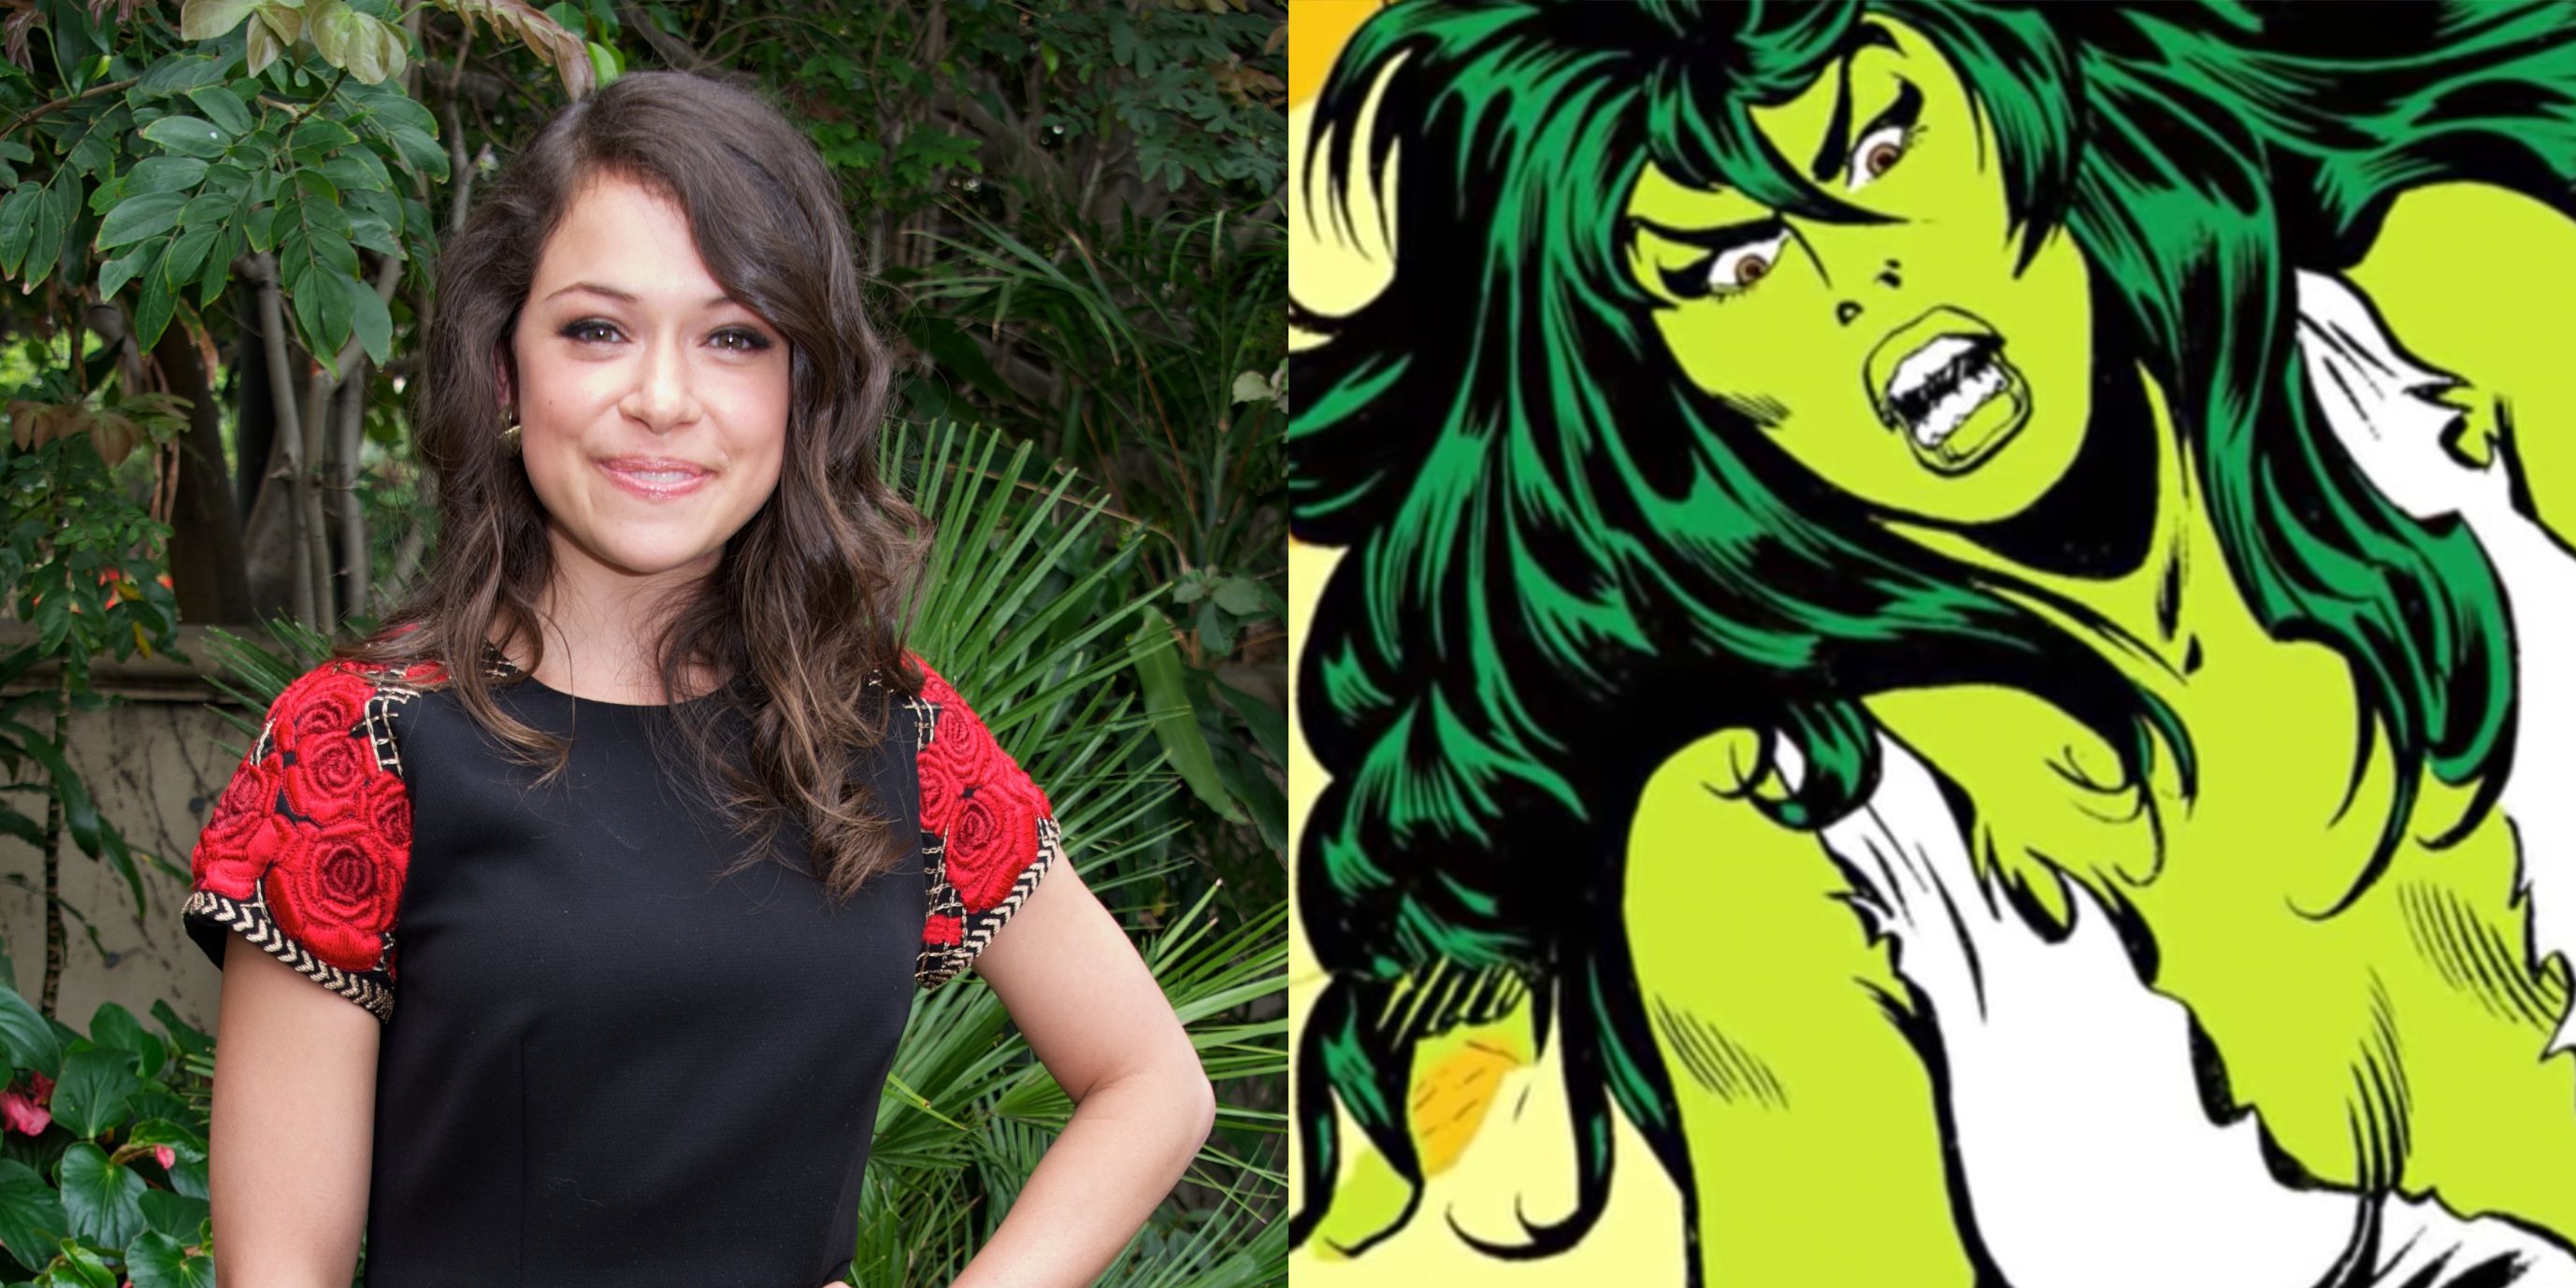 She-Hulk Season 1 Guide to Release Date, Cast News and Spoilers